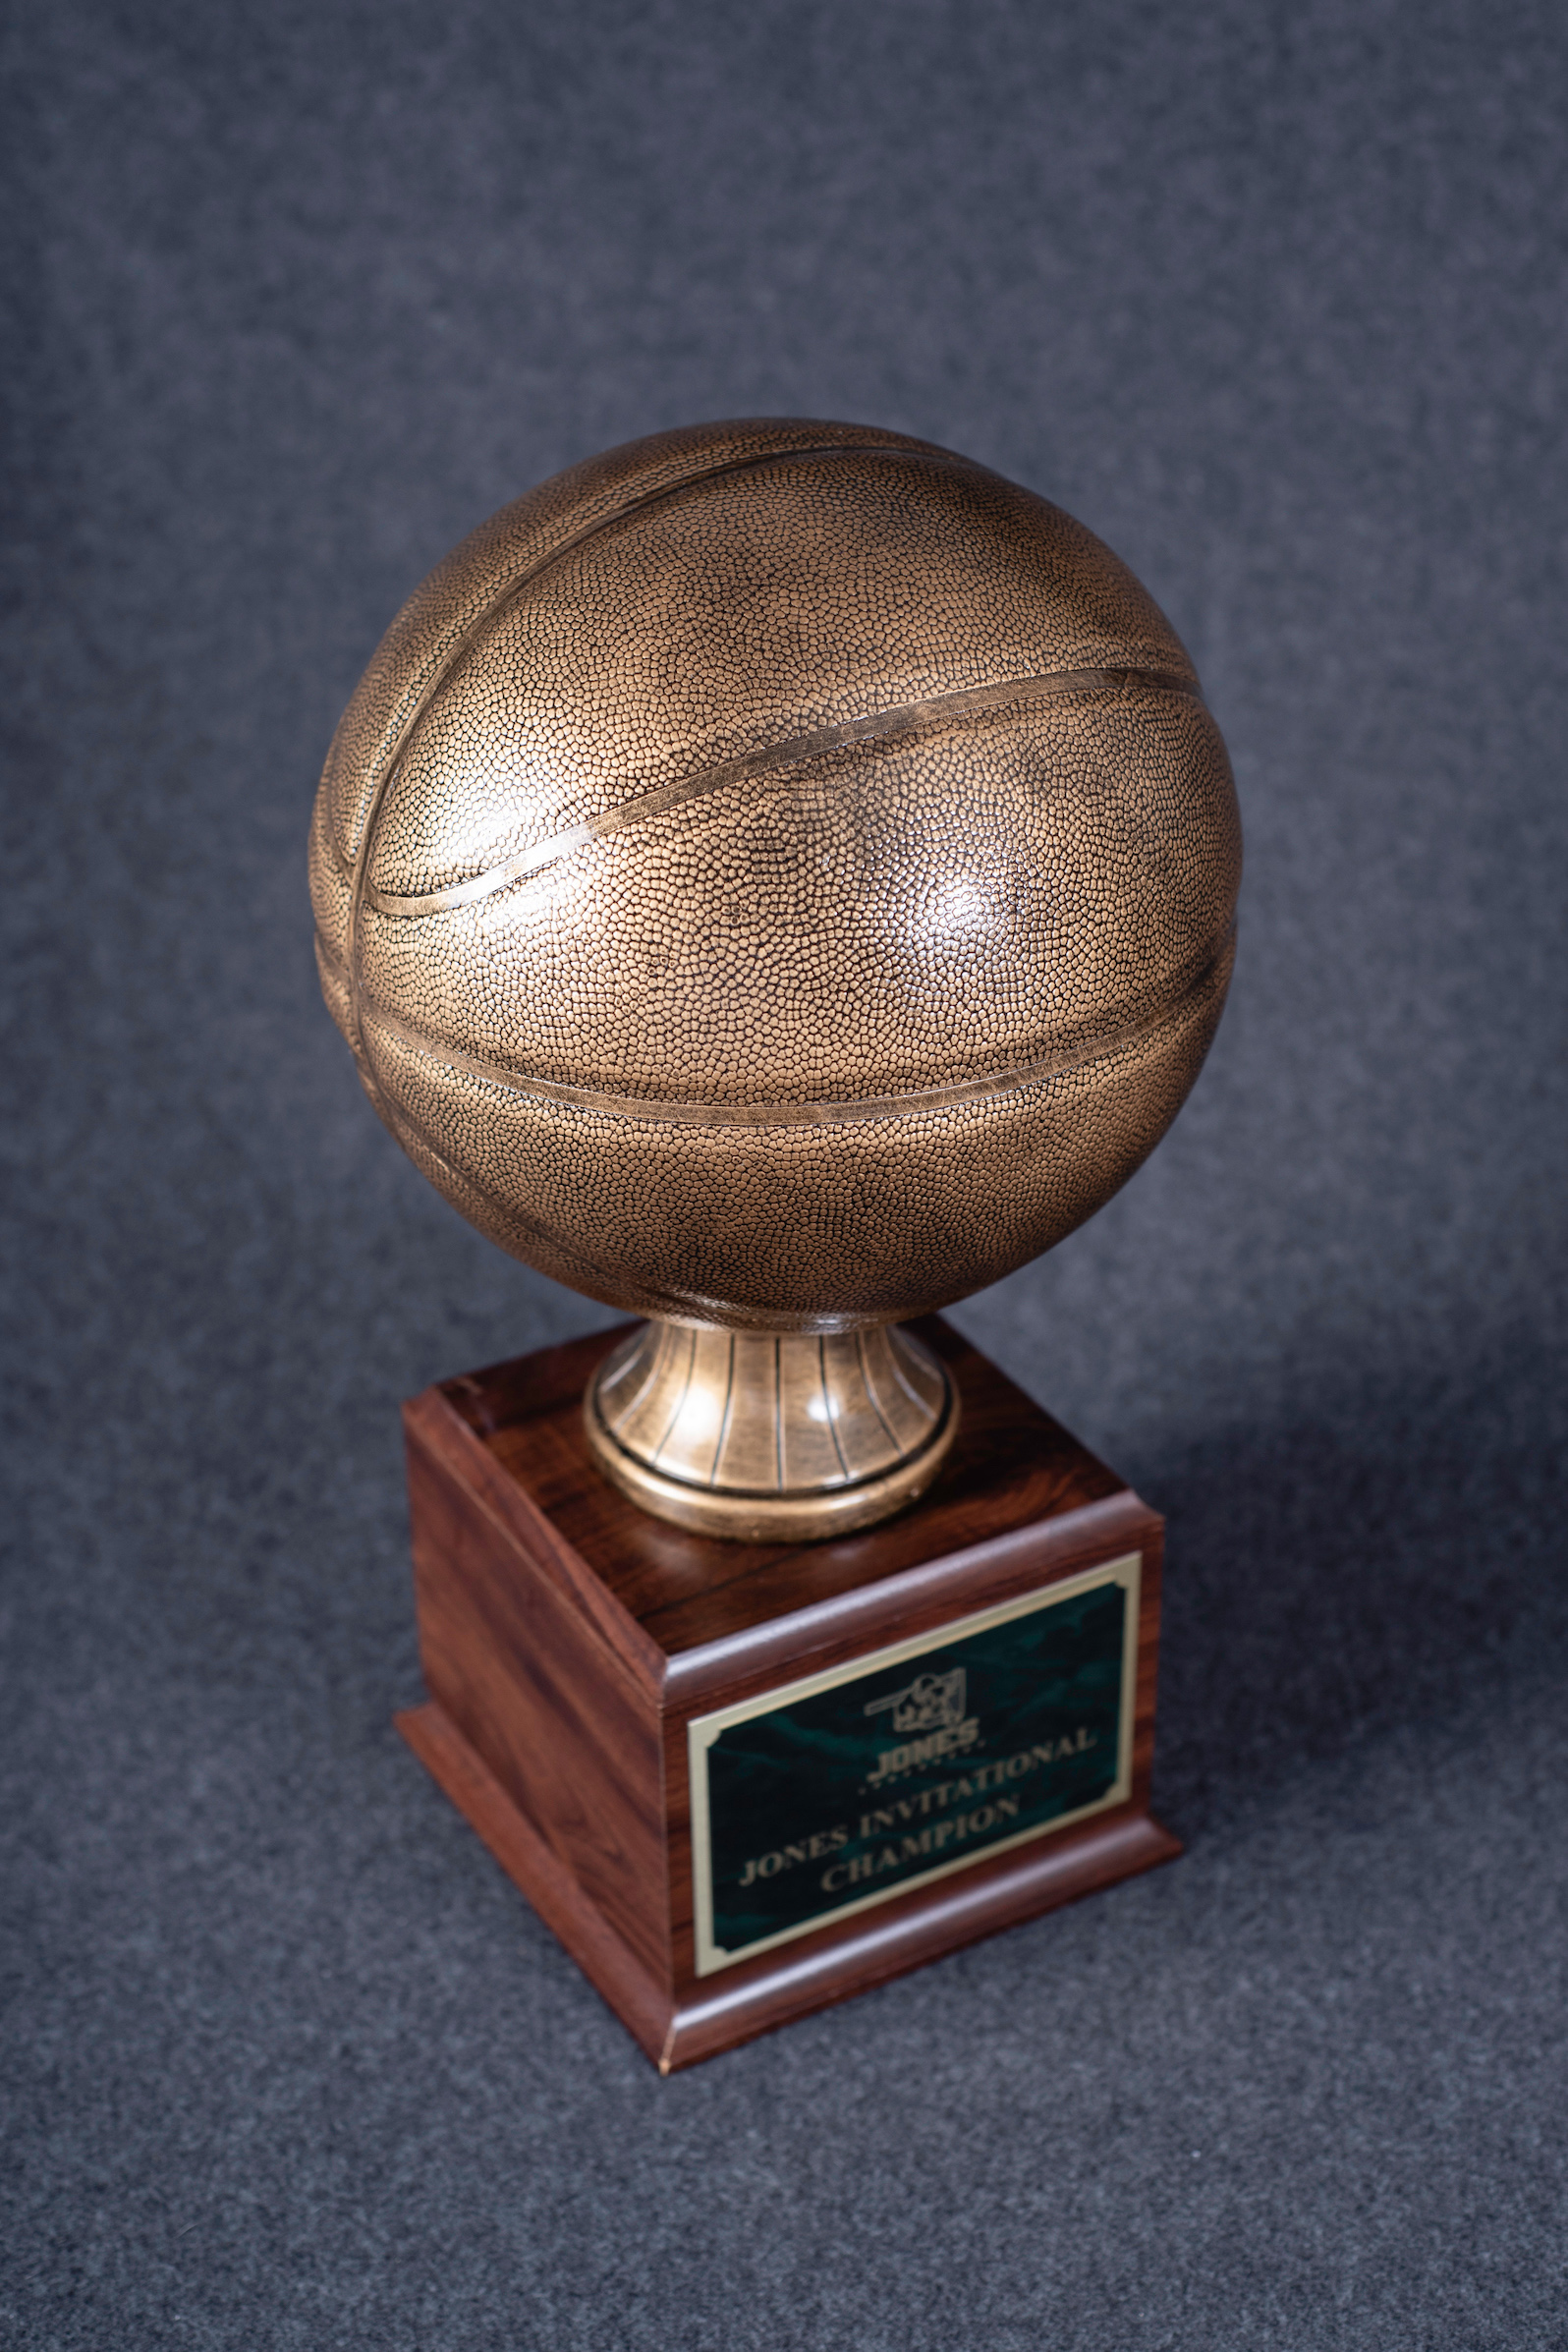 FANTASY BASKETBALL PERPETUAL TROPHY 22 YEARS 32 INCHES TALL * 